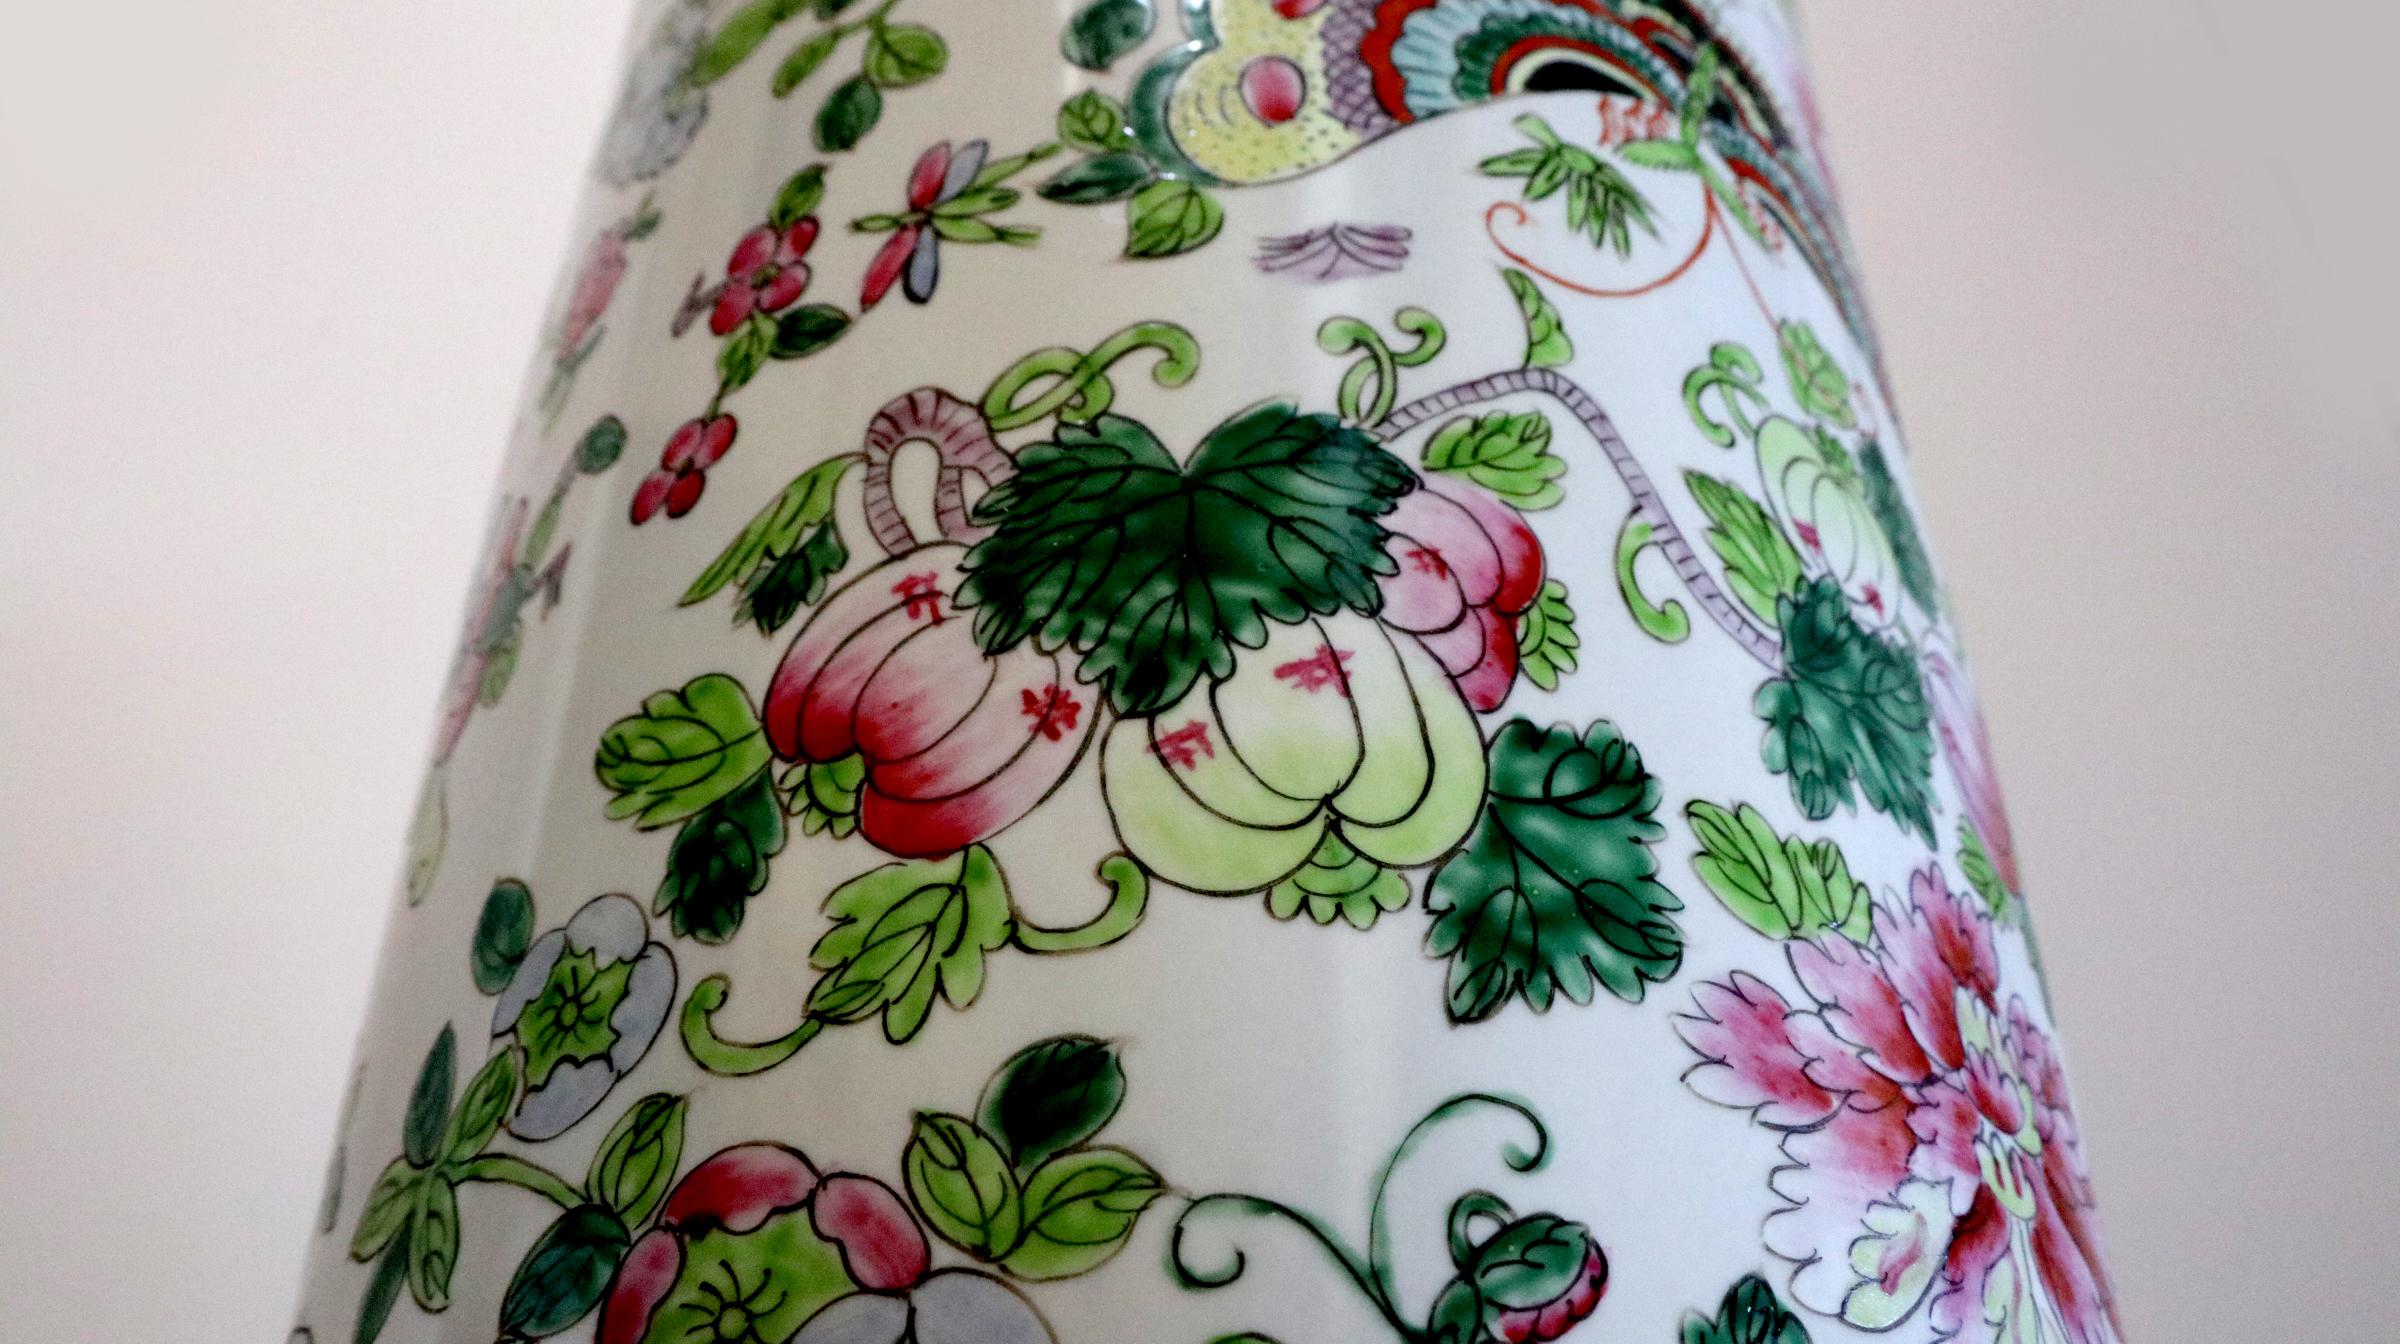 A combination of Japanese and Korean style and technique make this vintage mid century umbrella stand a rare find. The hand painted design is produced on a white ground. It is most likely of mid 20th century. Based on the beautiful designs with